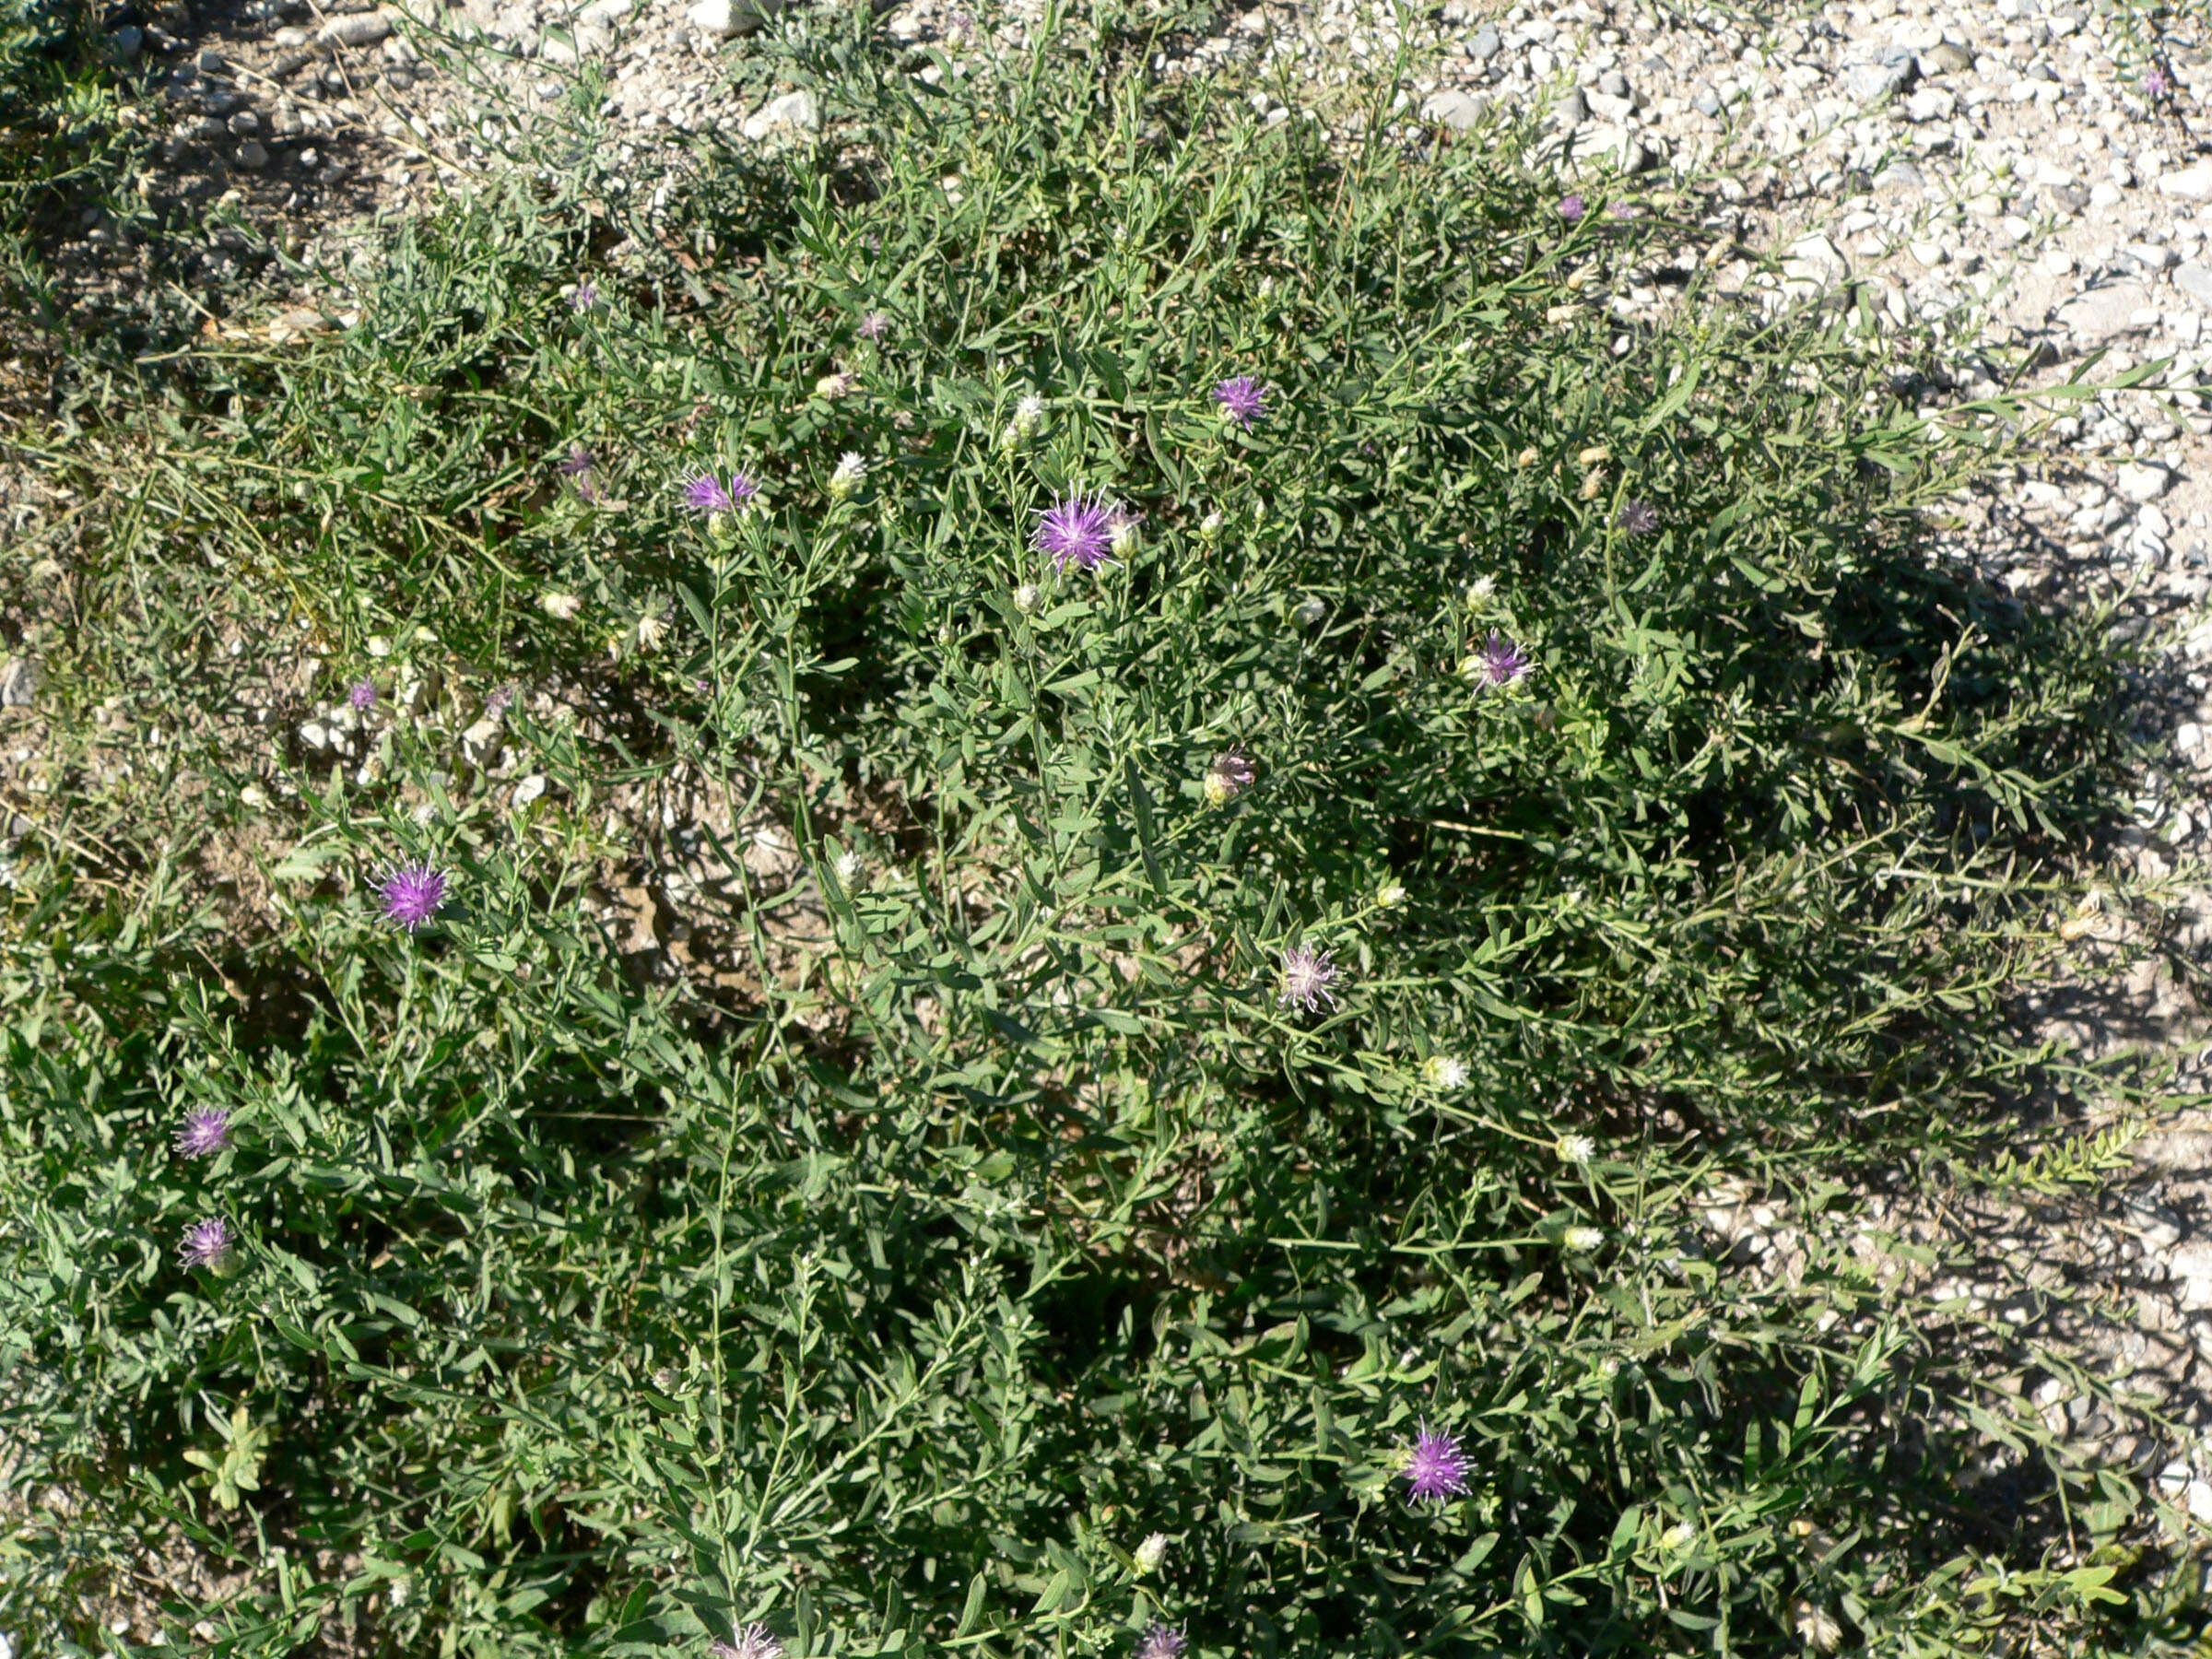 Image of Russian Knapweed